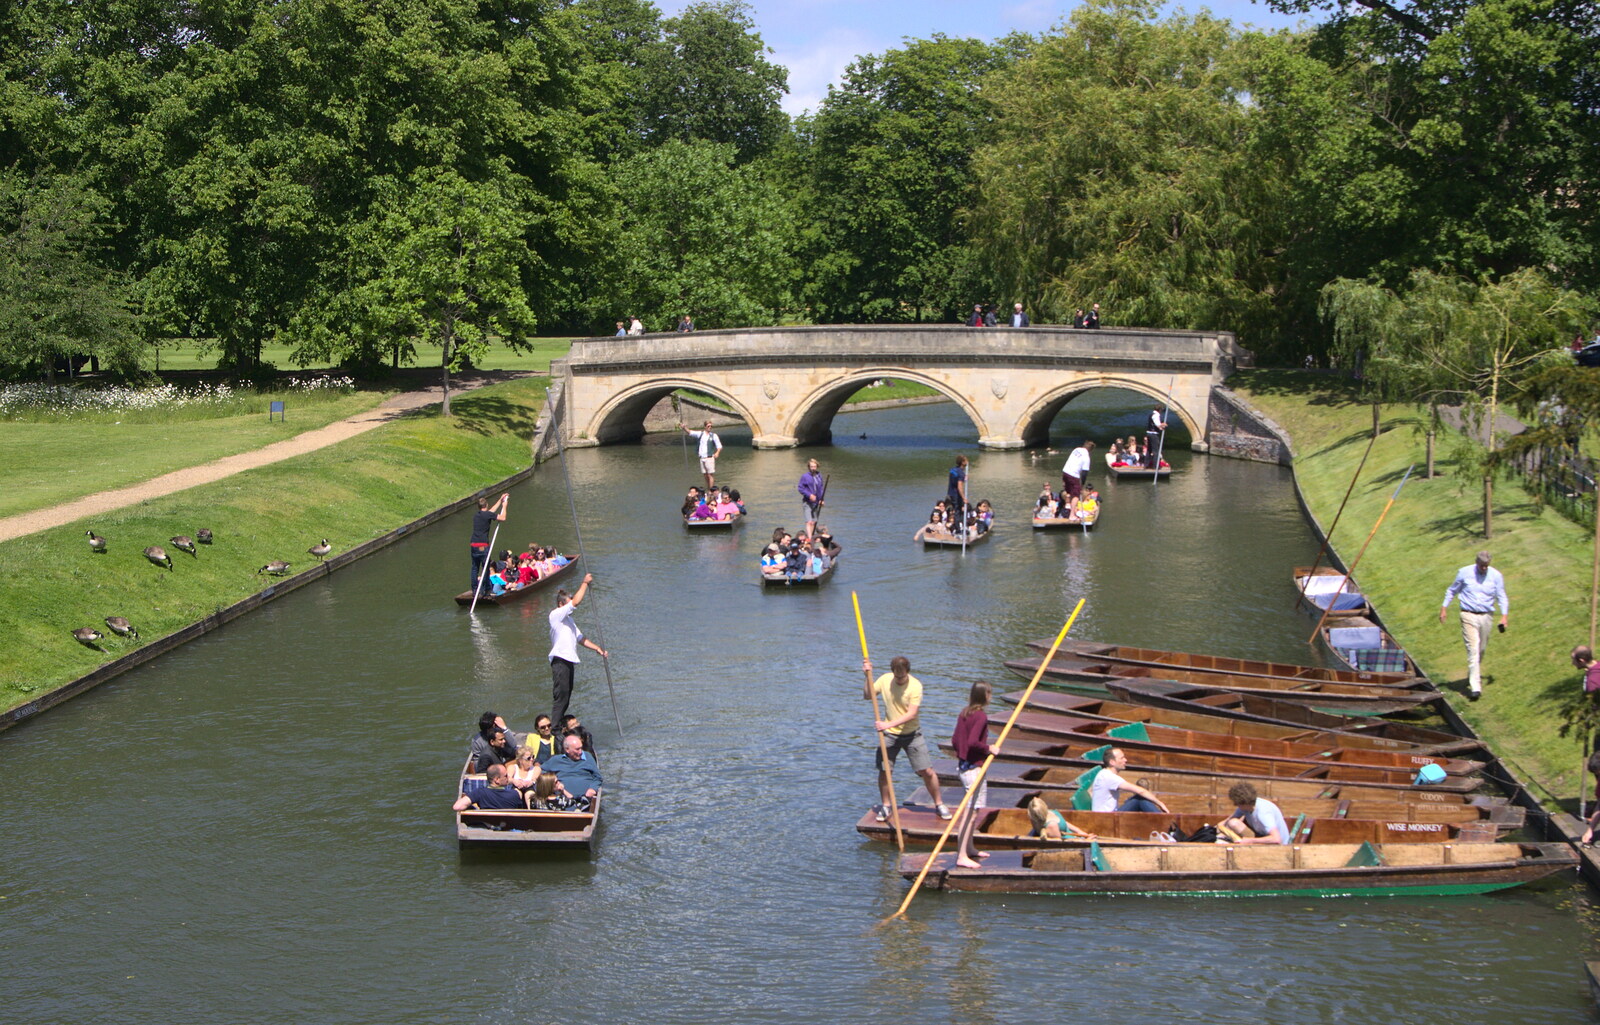 Spring punting on the Cam from Punting With Grandad, Cambridge, Cambridgeshire - 6th June 2015